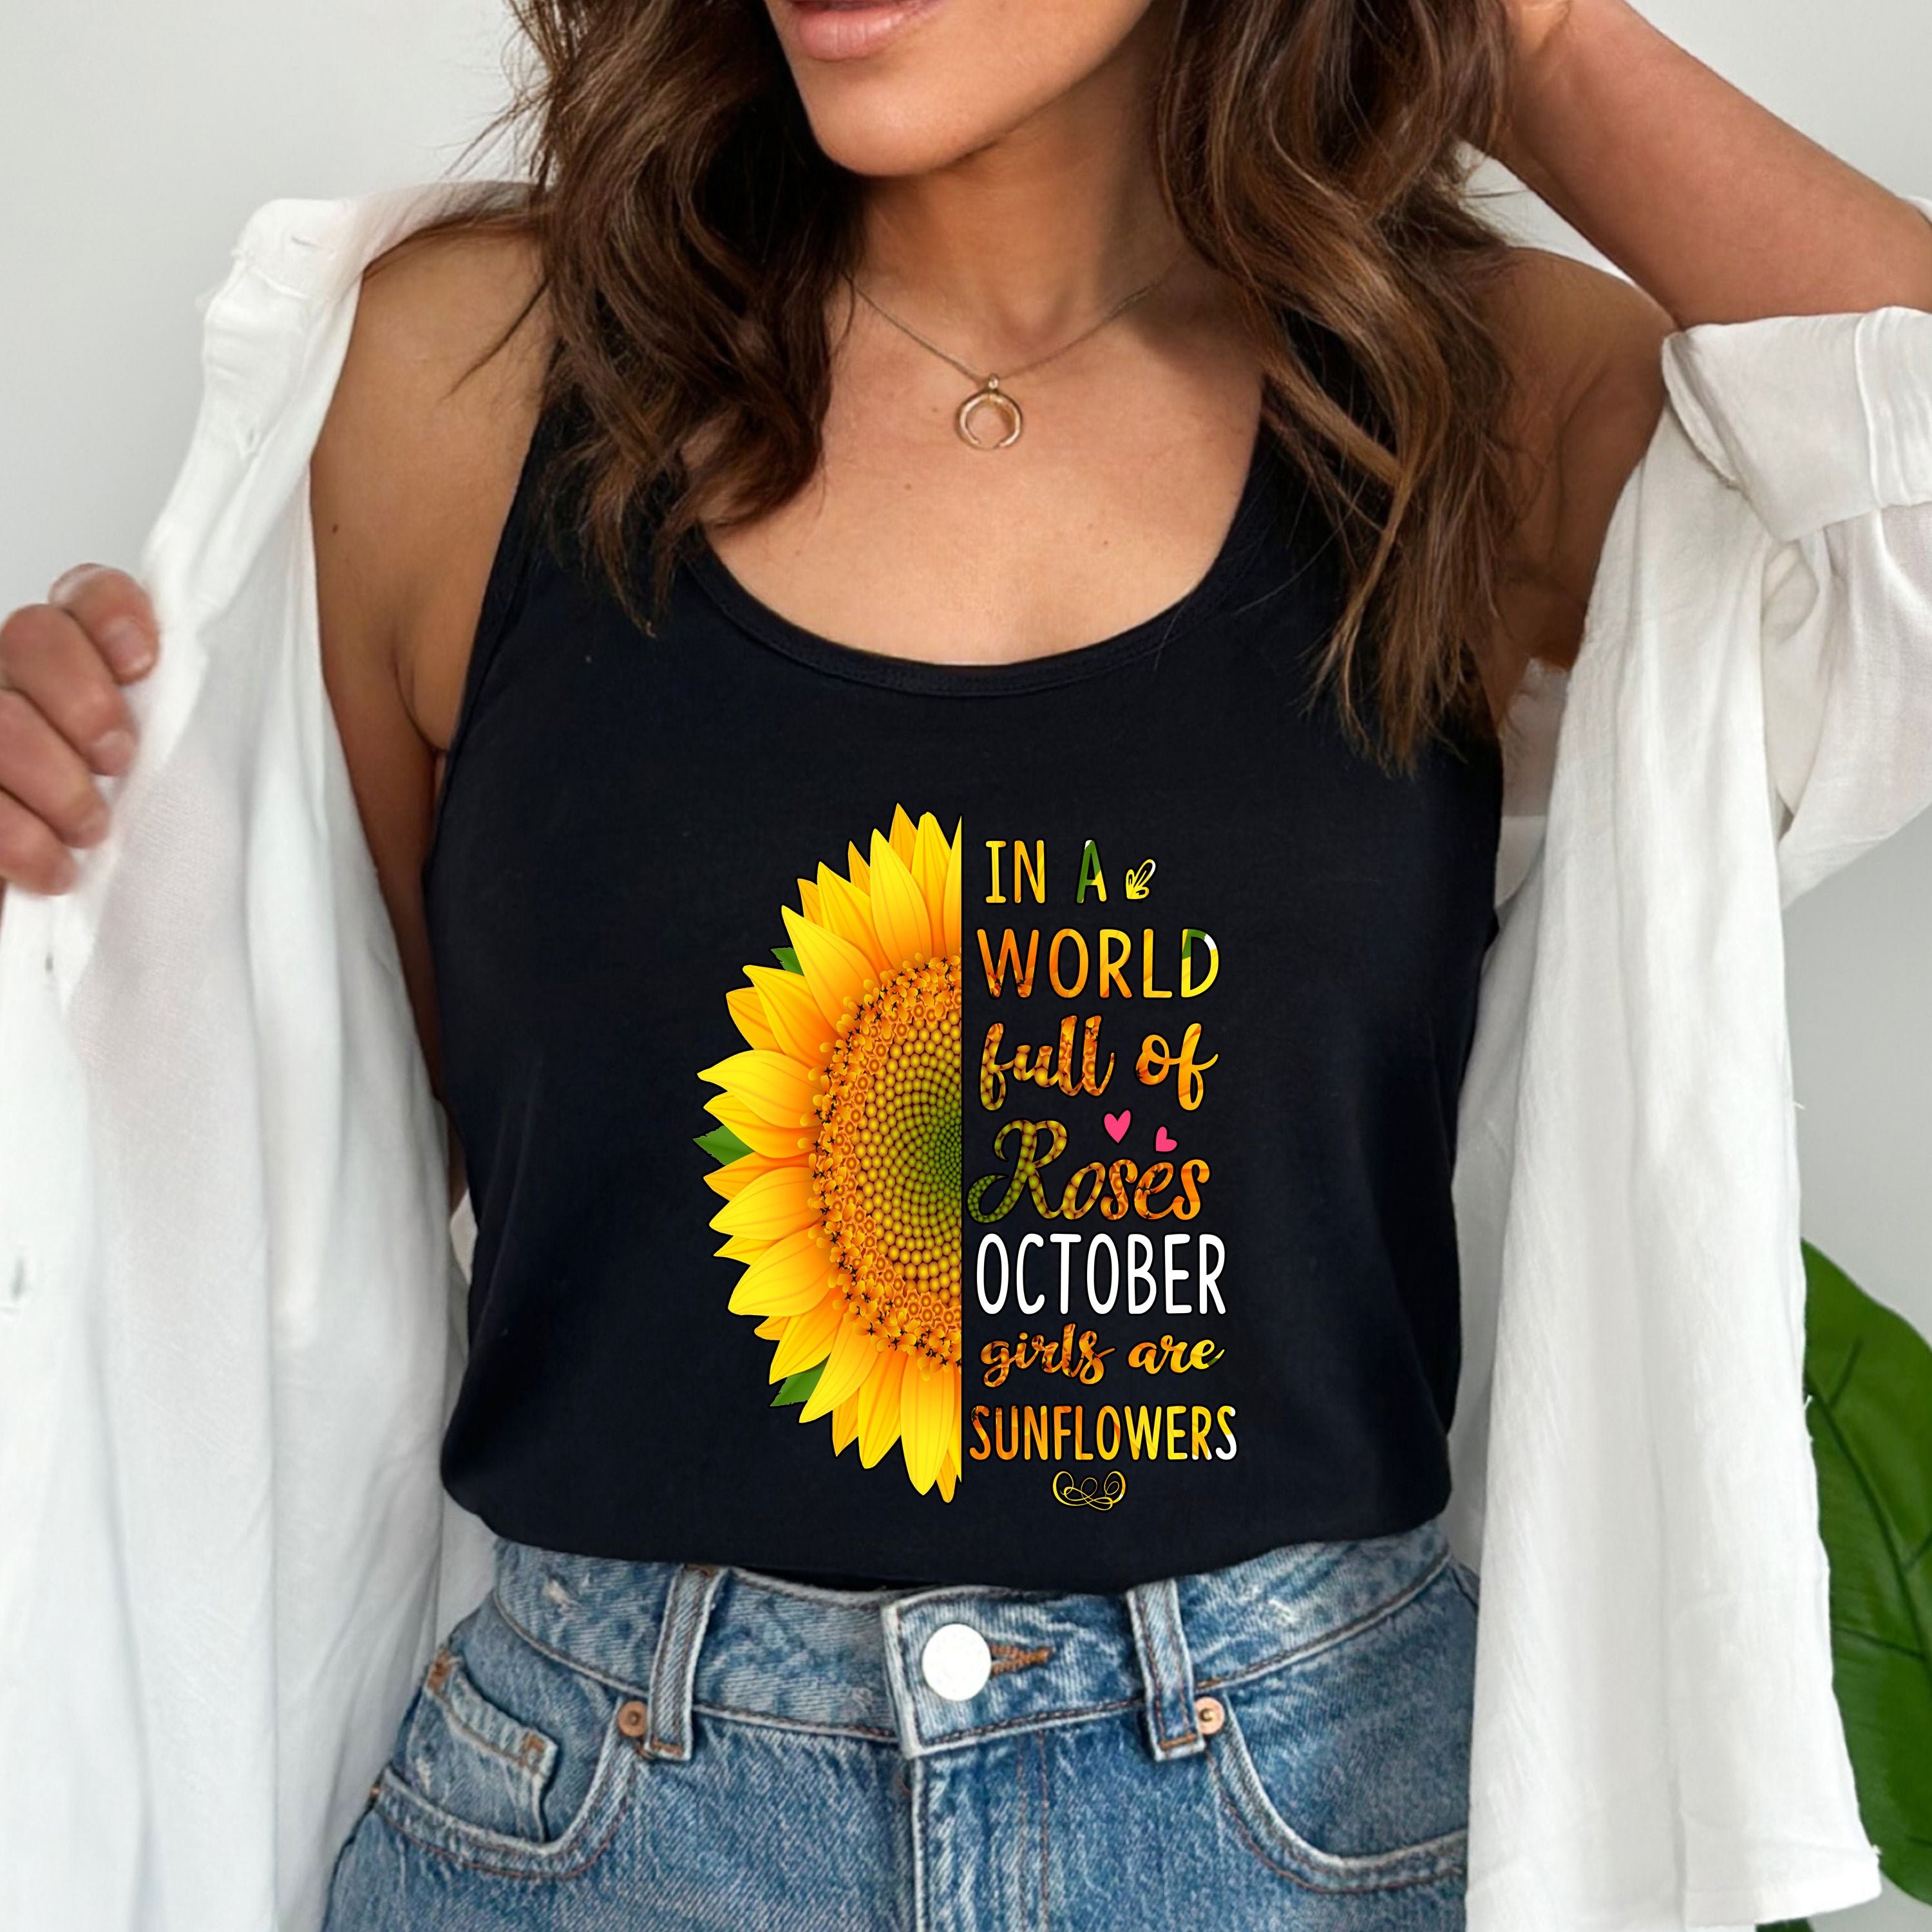 "In a world full of roses October girls are Sunflowers"